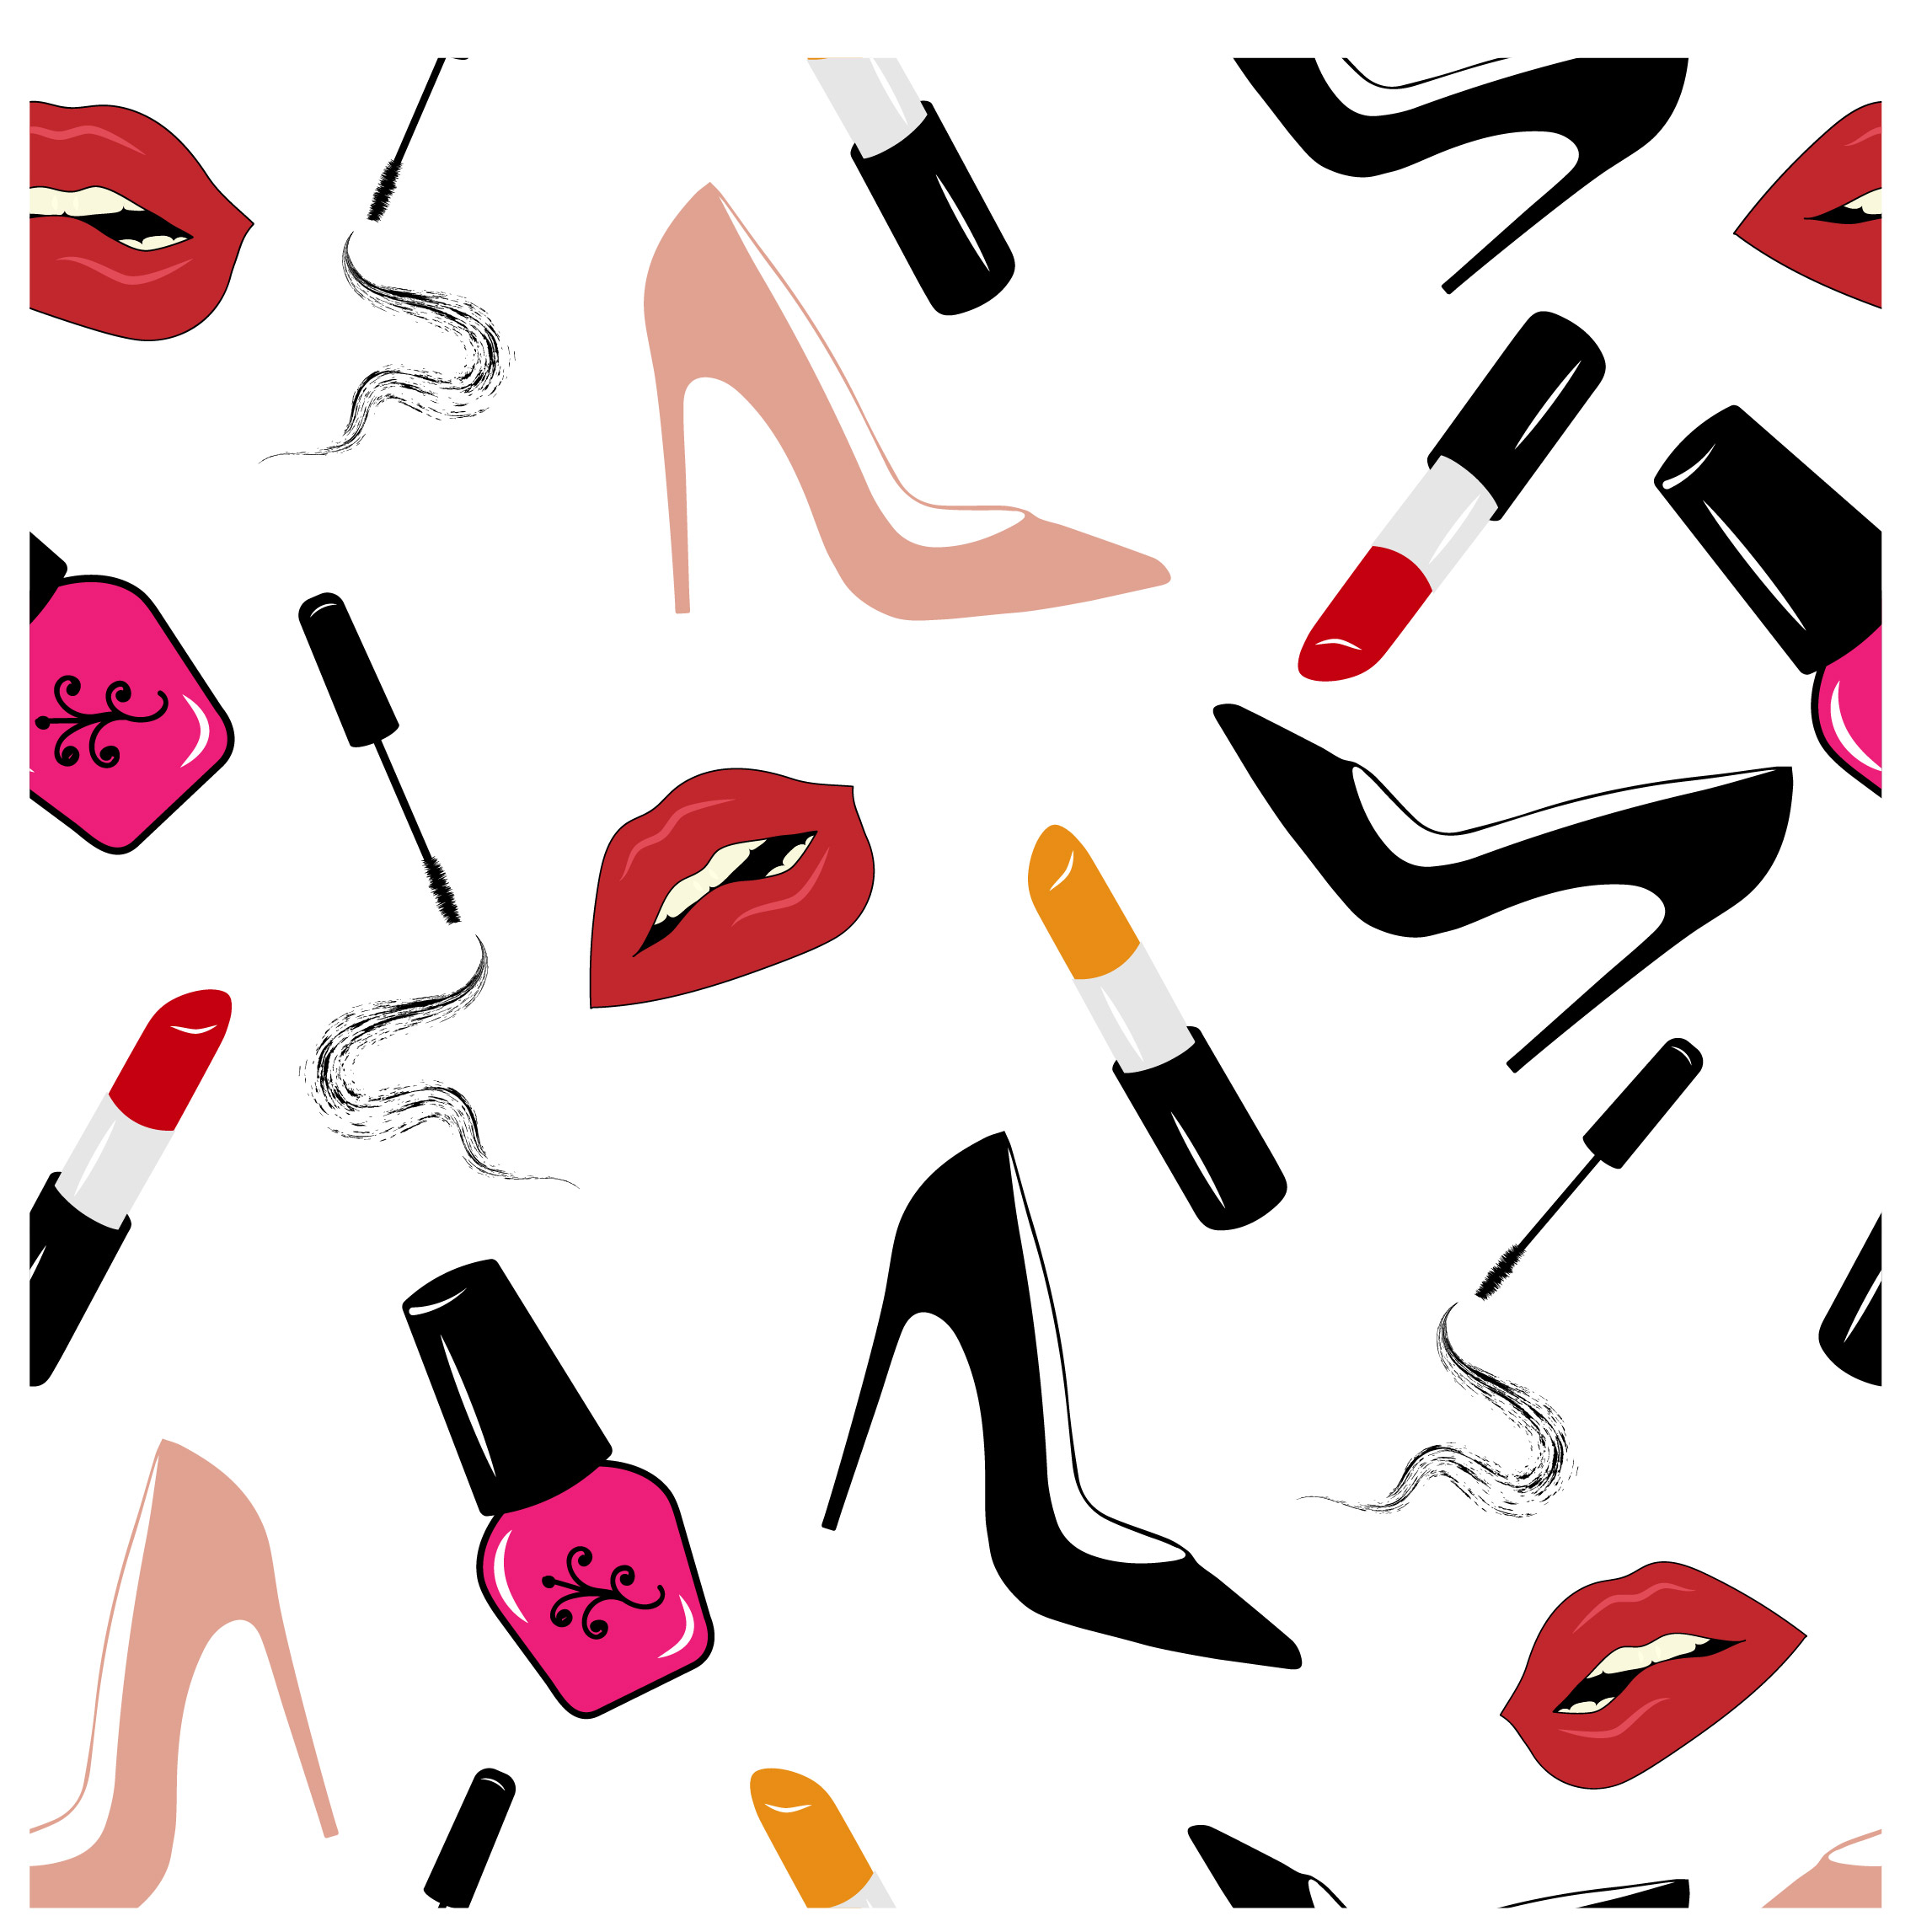 Woman Beauty and Makeup Logo and Icons pattern jpg.